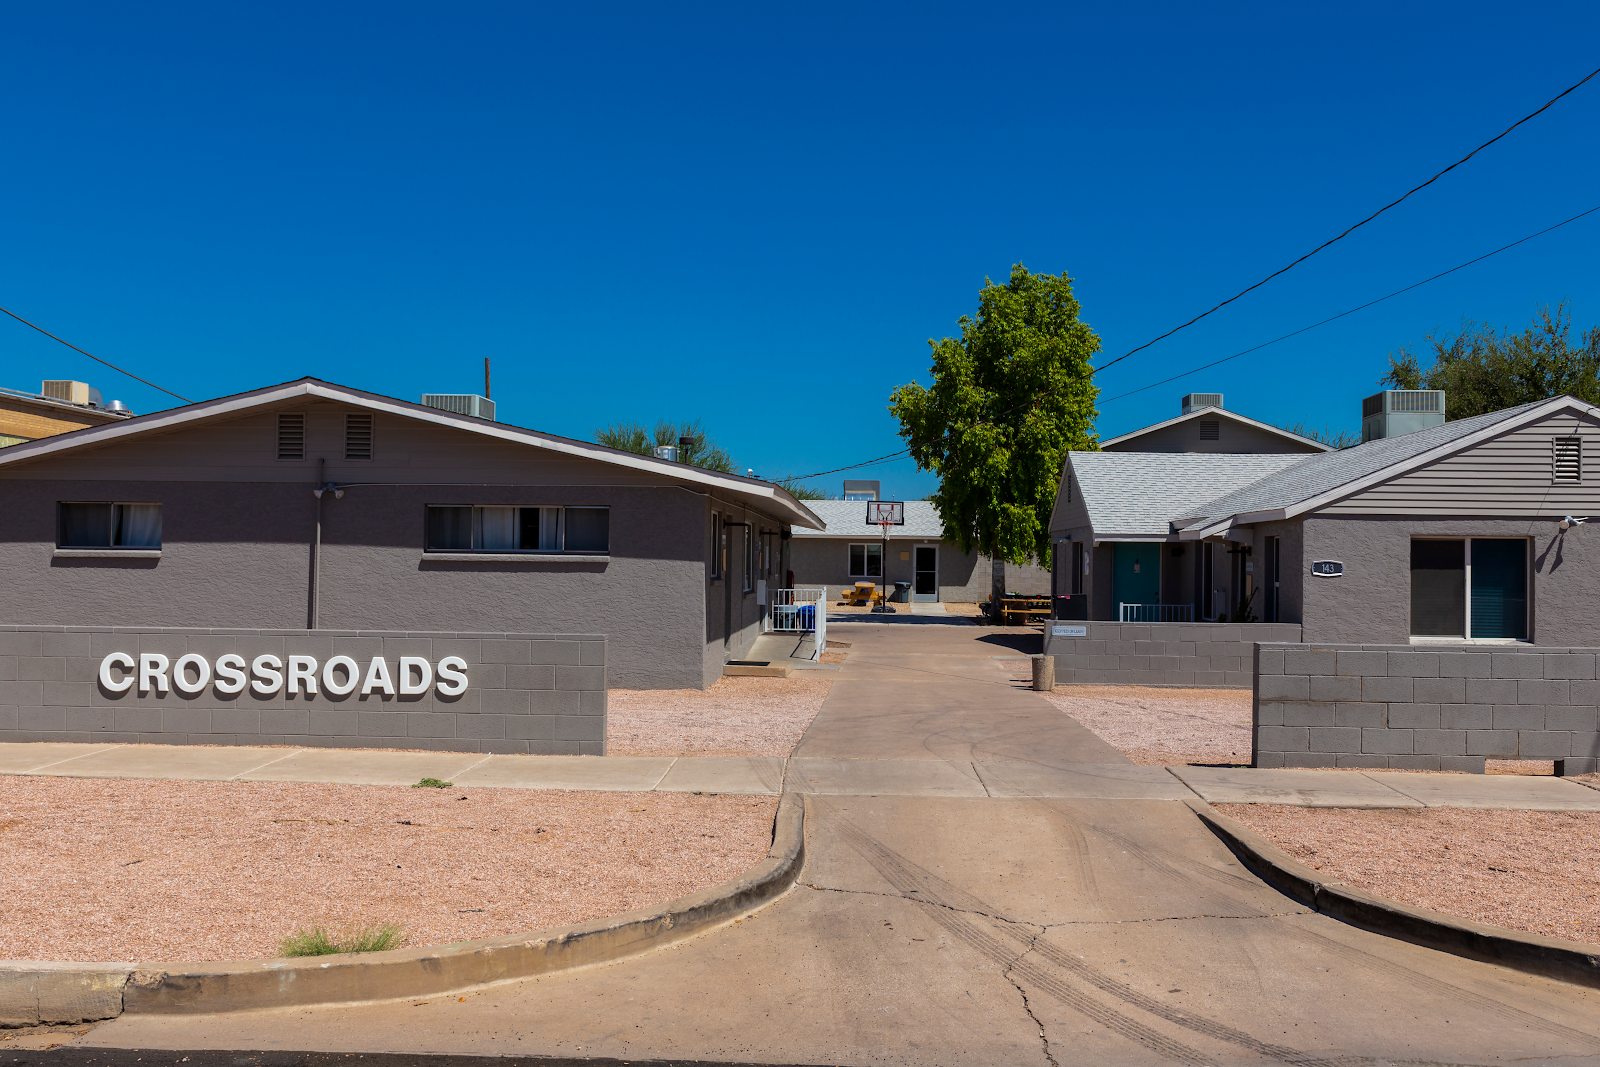 Crossroads - Red Mountain Campus for Men